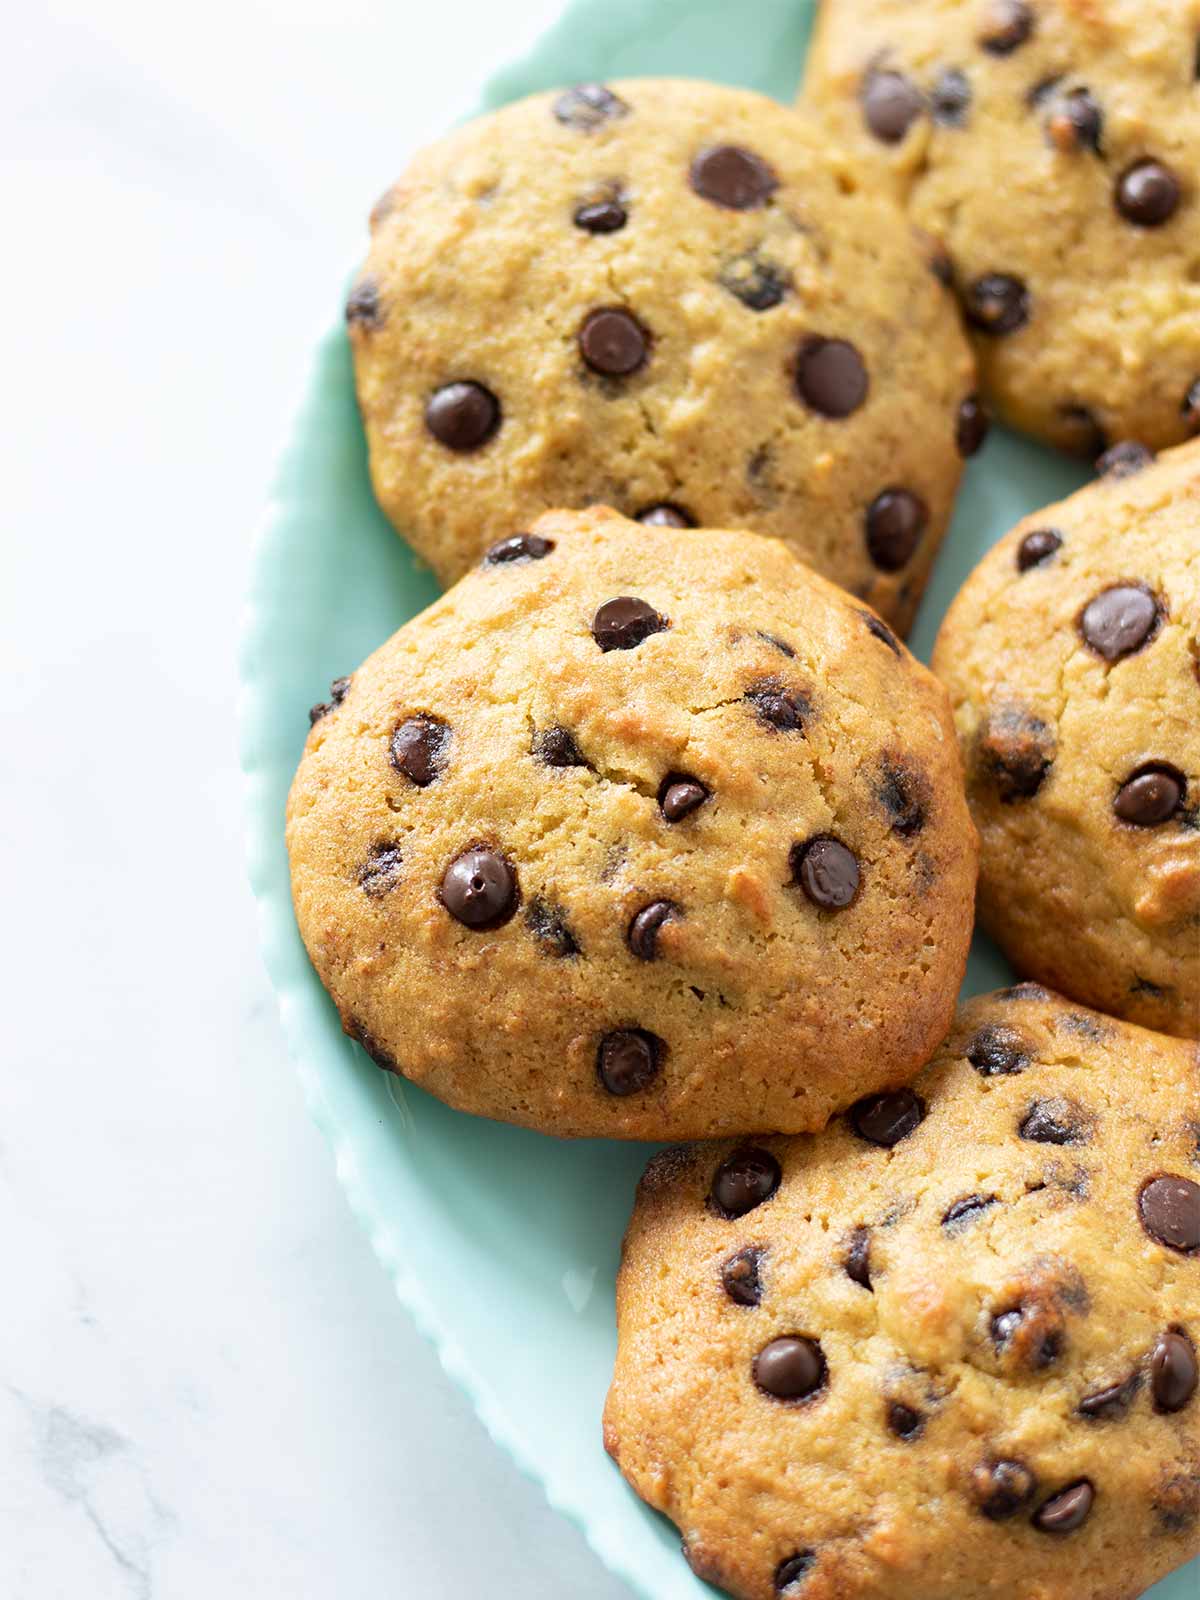 Eggless chickpea flour banana cookies with chocolate chips on a plate